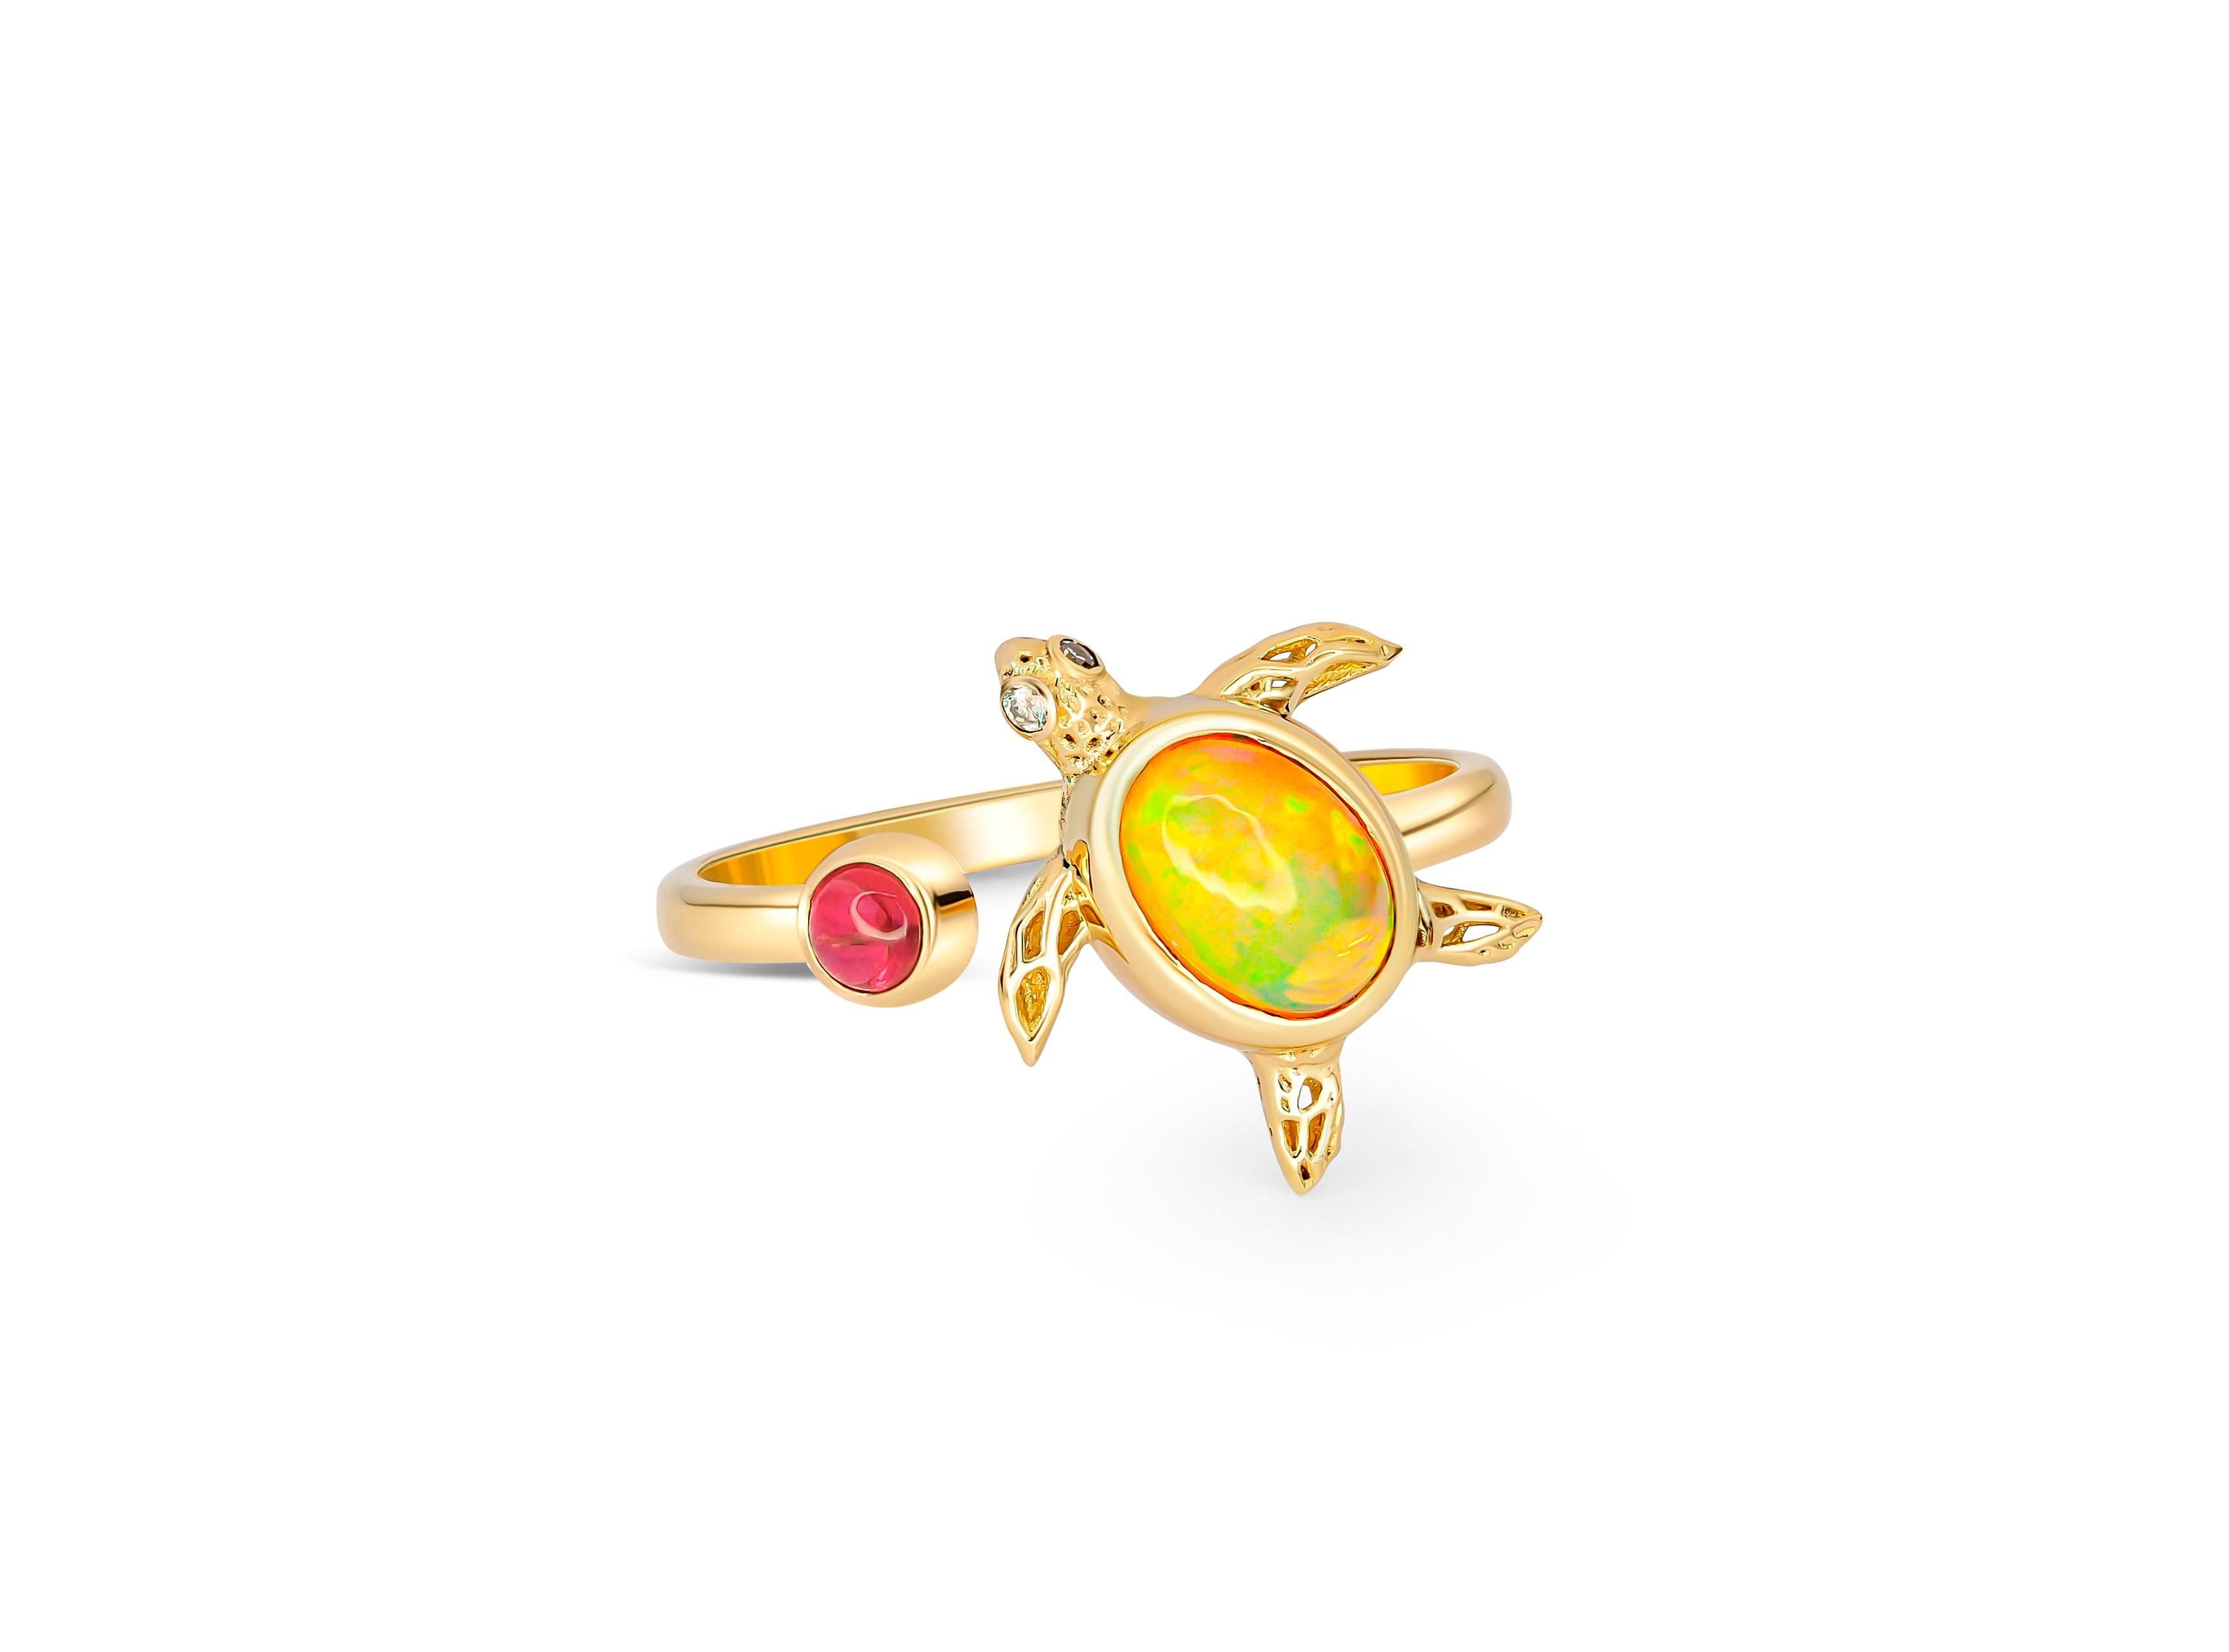 Sea Turtle gold ring with opal. 
Opal gold ring. 14k gold ring with opal, ruby Animal gold ring. October birthstone ring. Ajustable opal ring

Metal: 14k gold
Weight: 2.20 g. depends from size

Main stone opal, solid 
Opal: color - multicolor
Oval